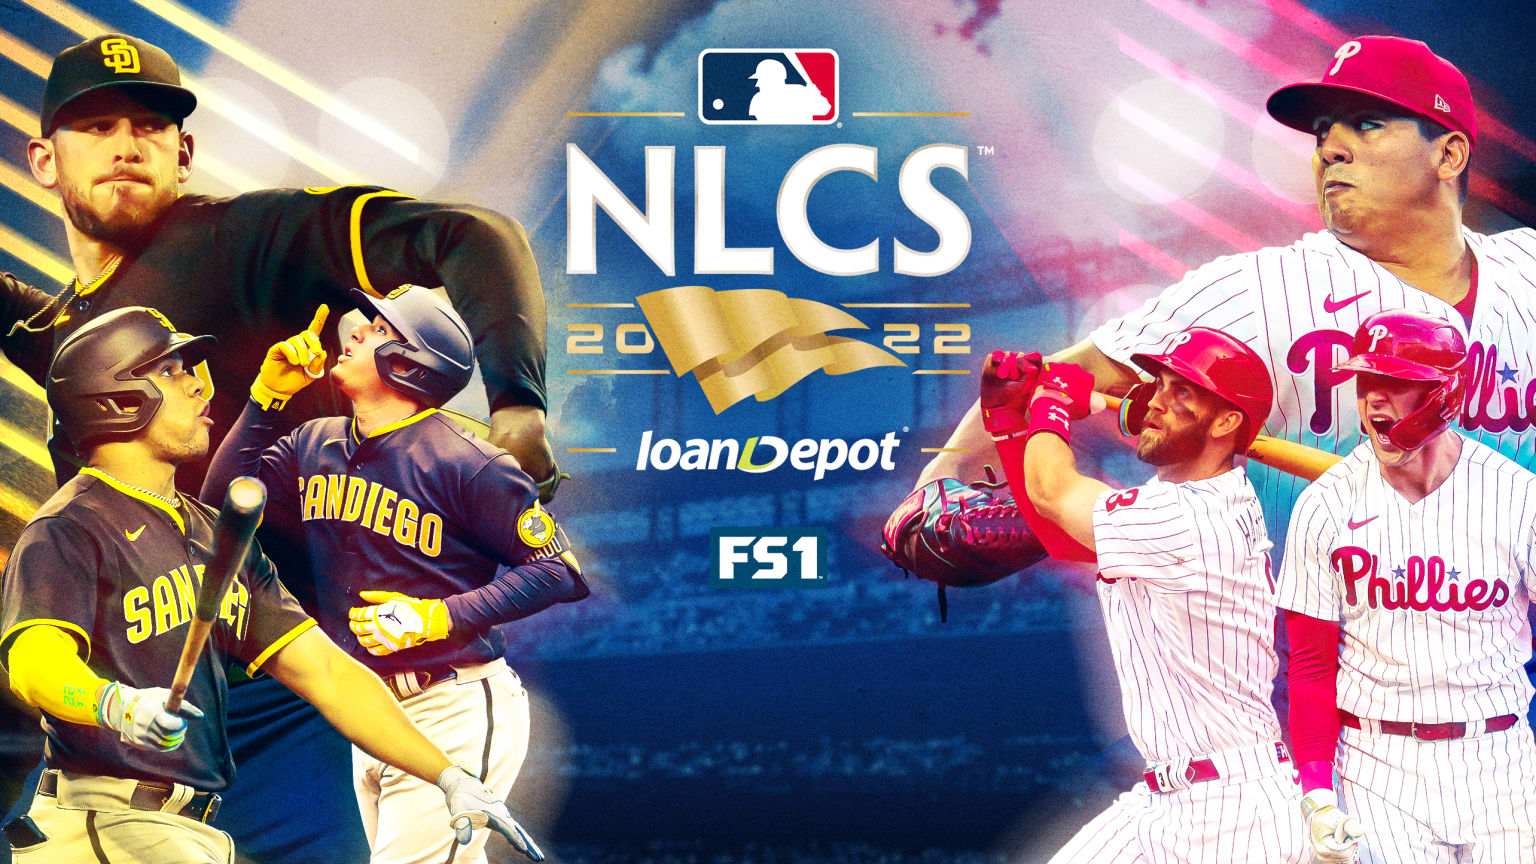 A designed image showing three Padres on the left, three Phillies on the right and the NLCS logo in the middle